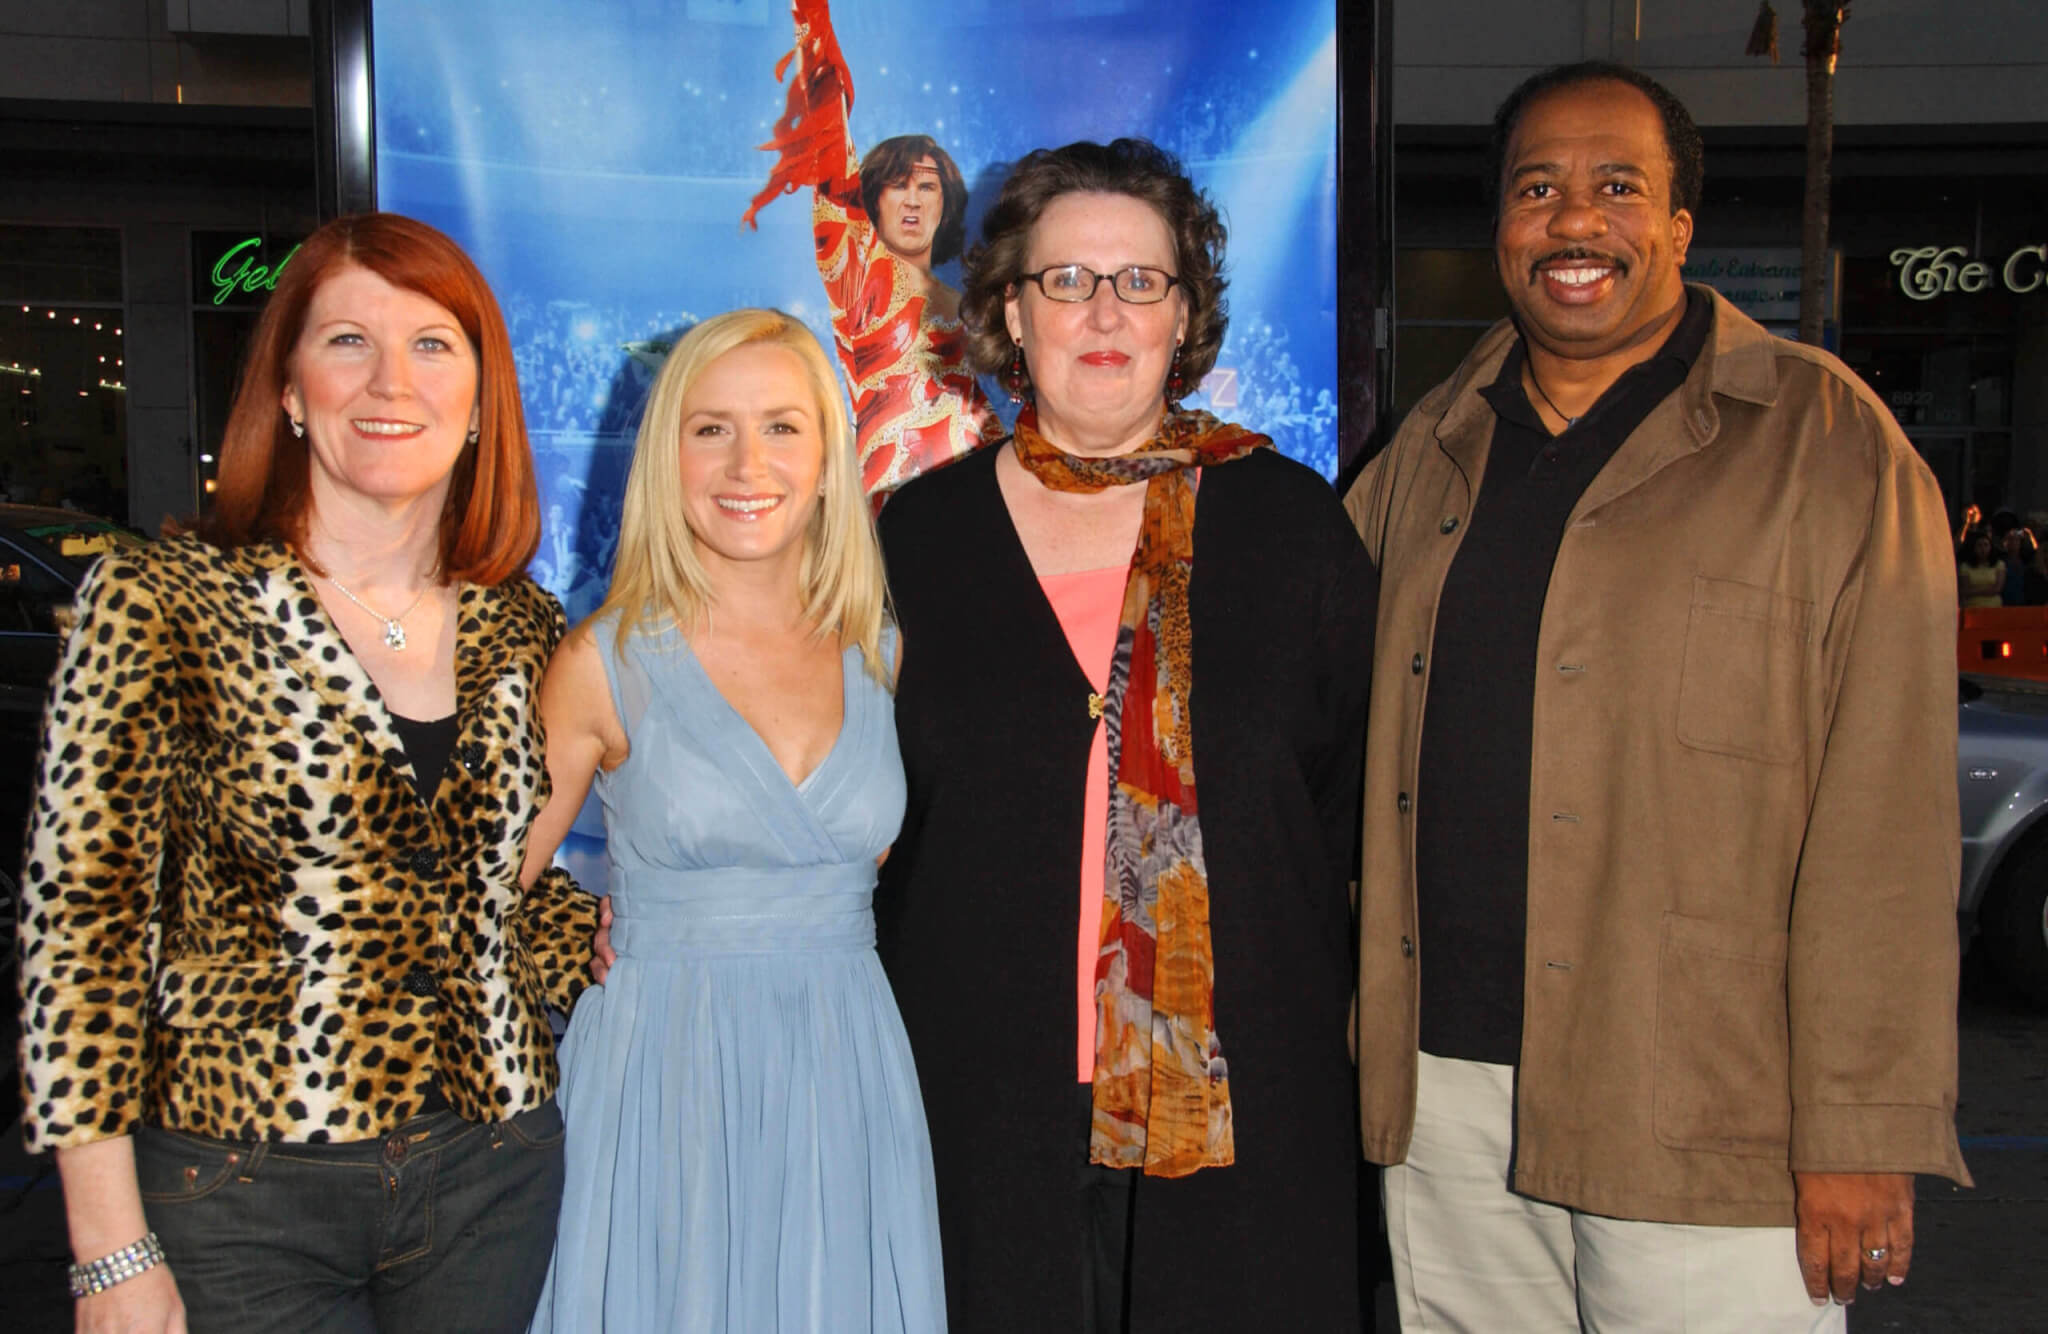 The Cast of "The Office" at the Los Angeles Premiere of "Blades of Glory" in 2007